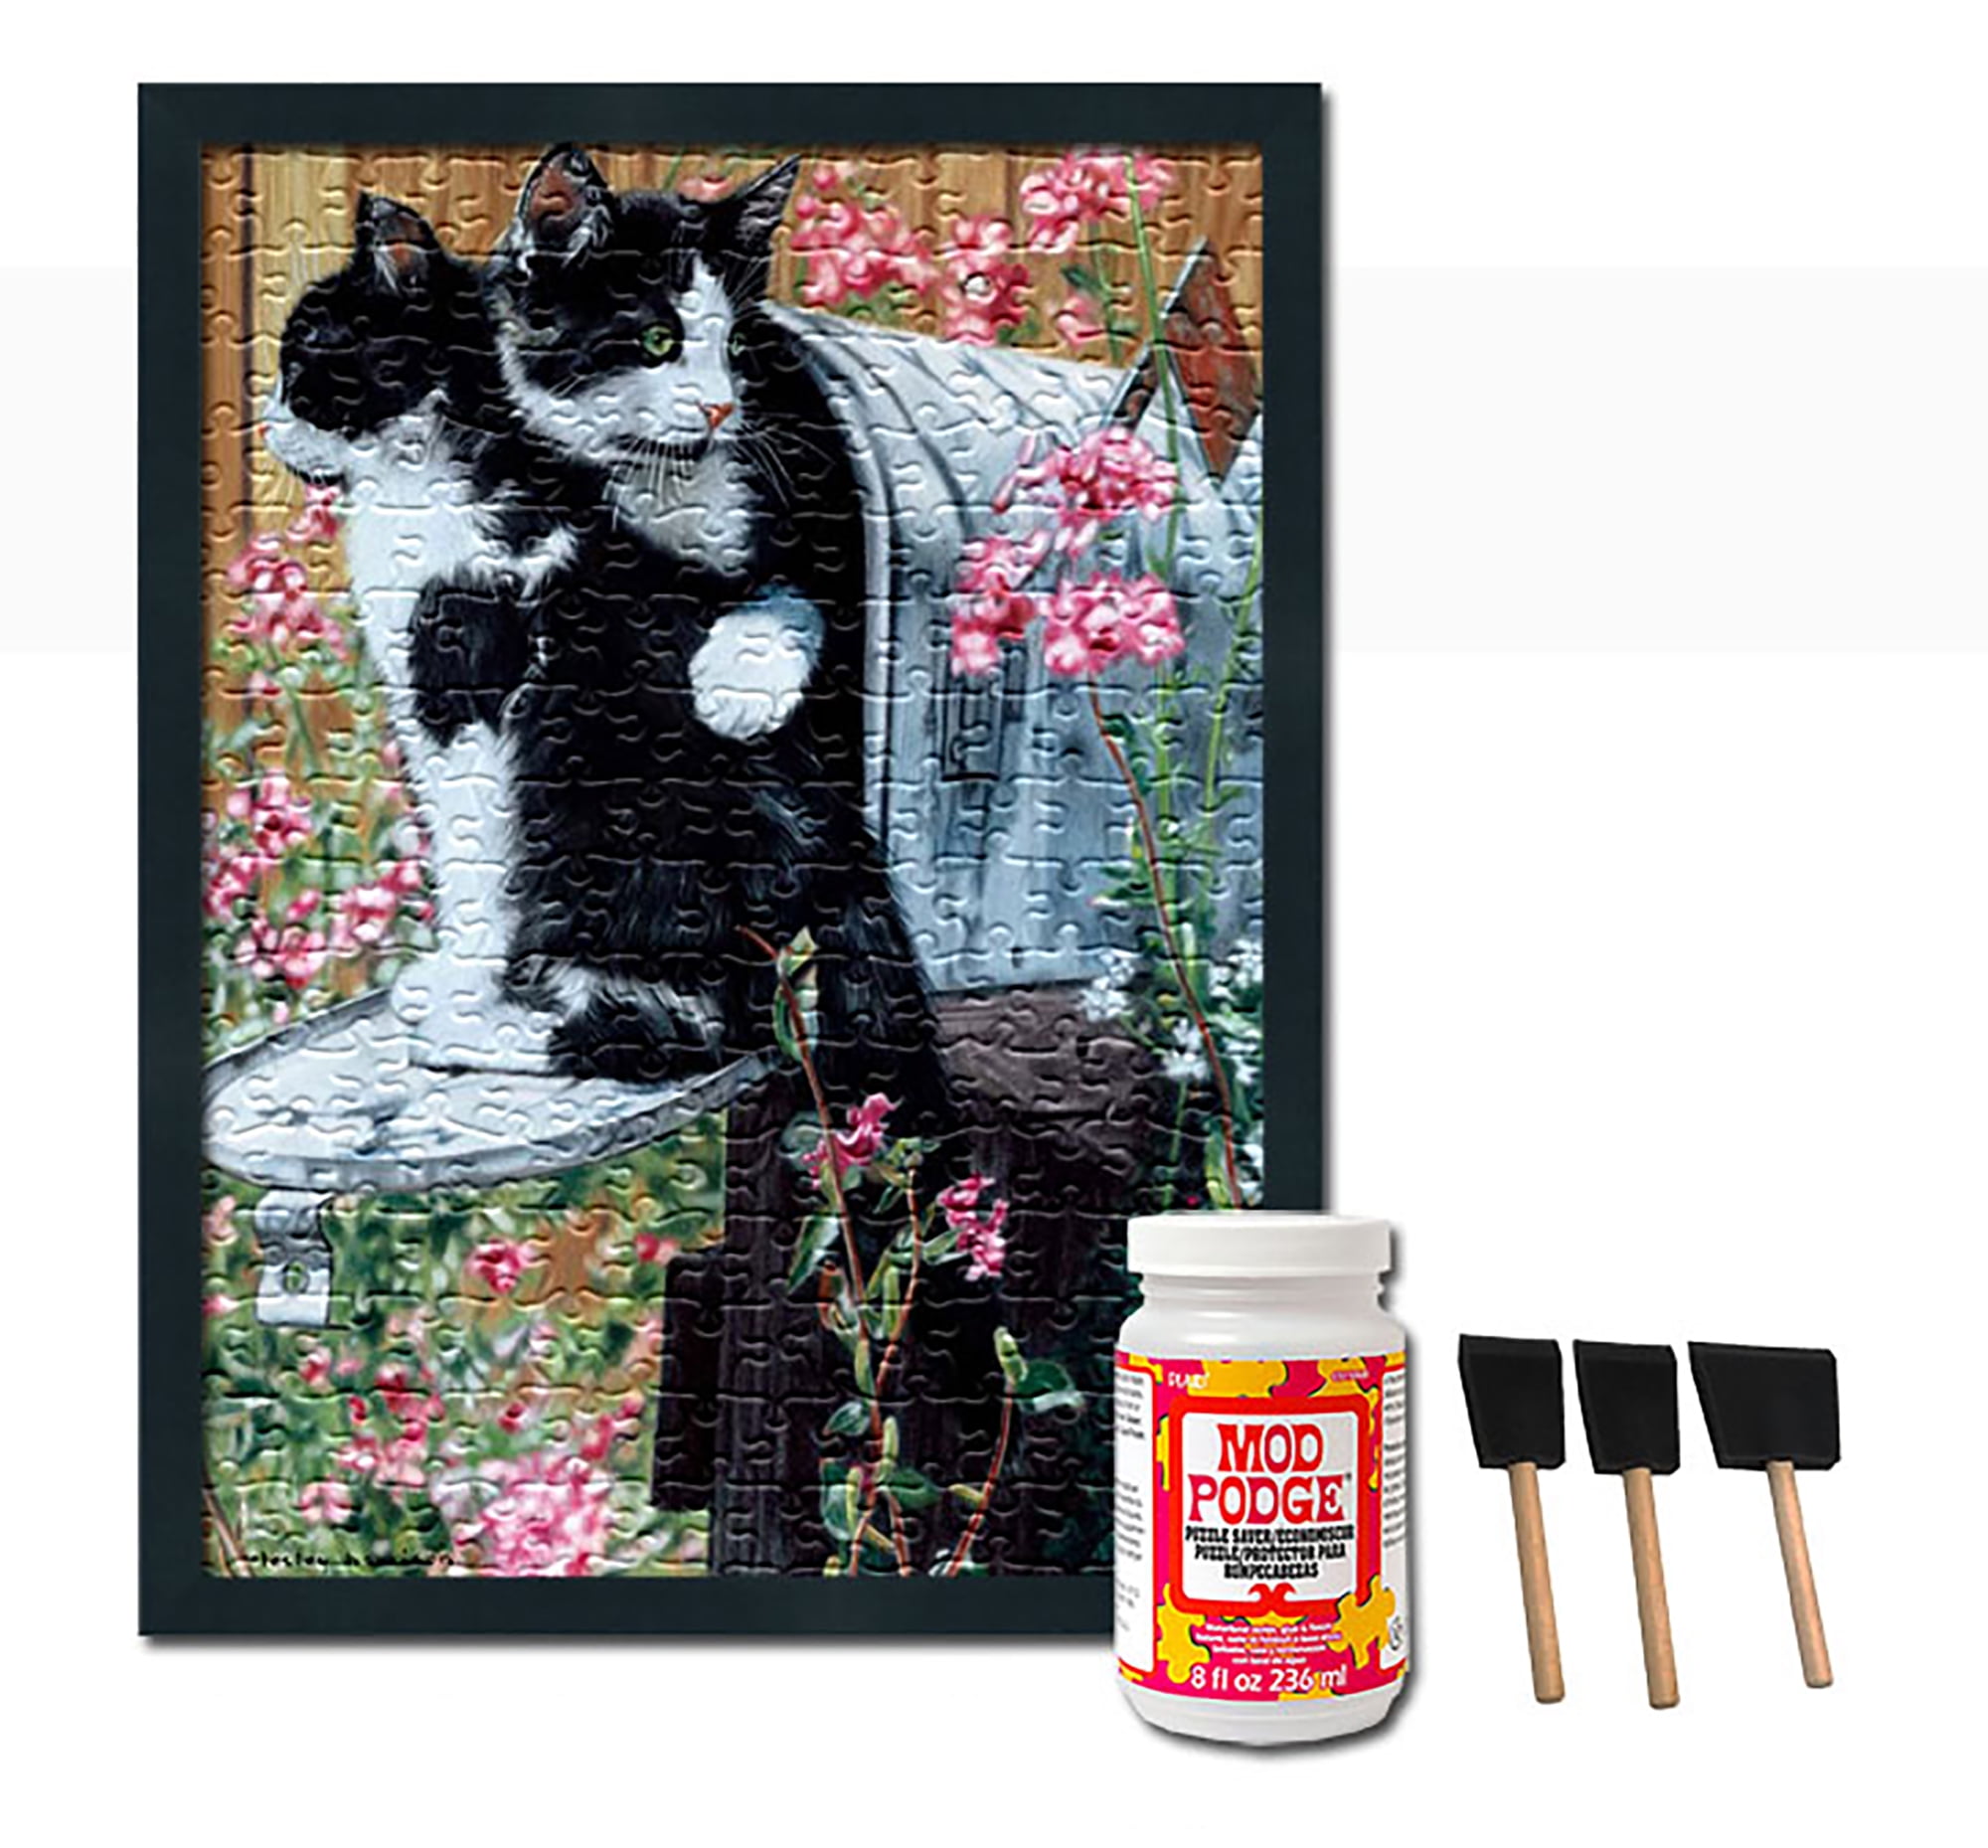 Mod Podge Jigsaw Puzzle Frame Kit - For Puzzles Measuring 21.25x15 inches 